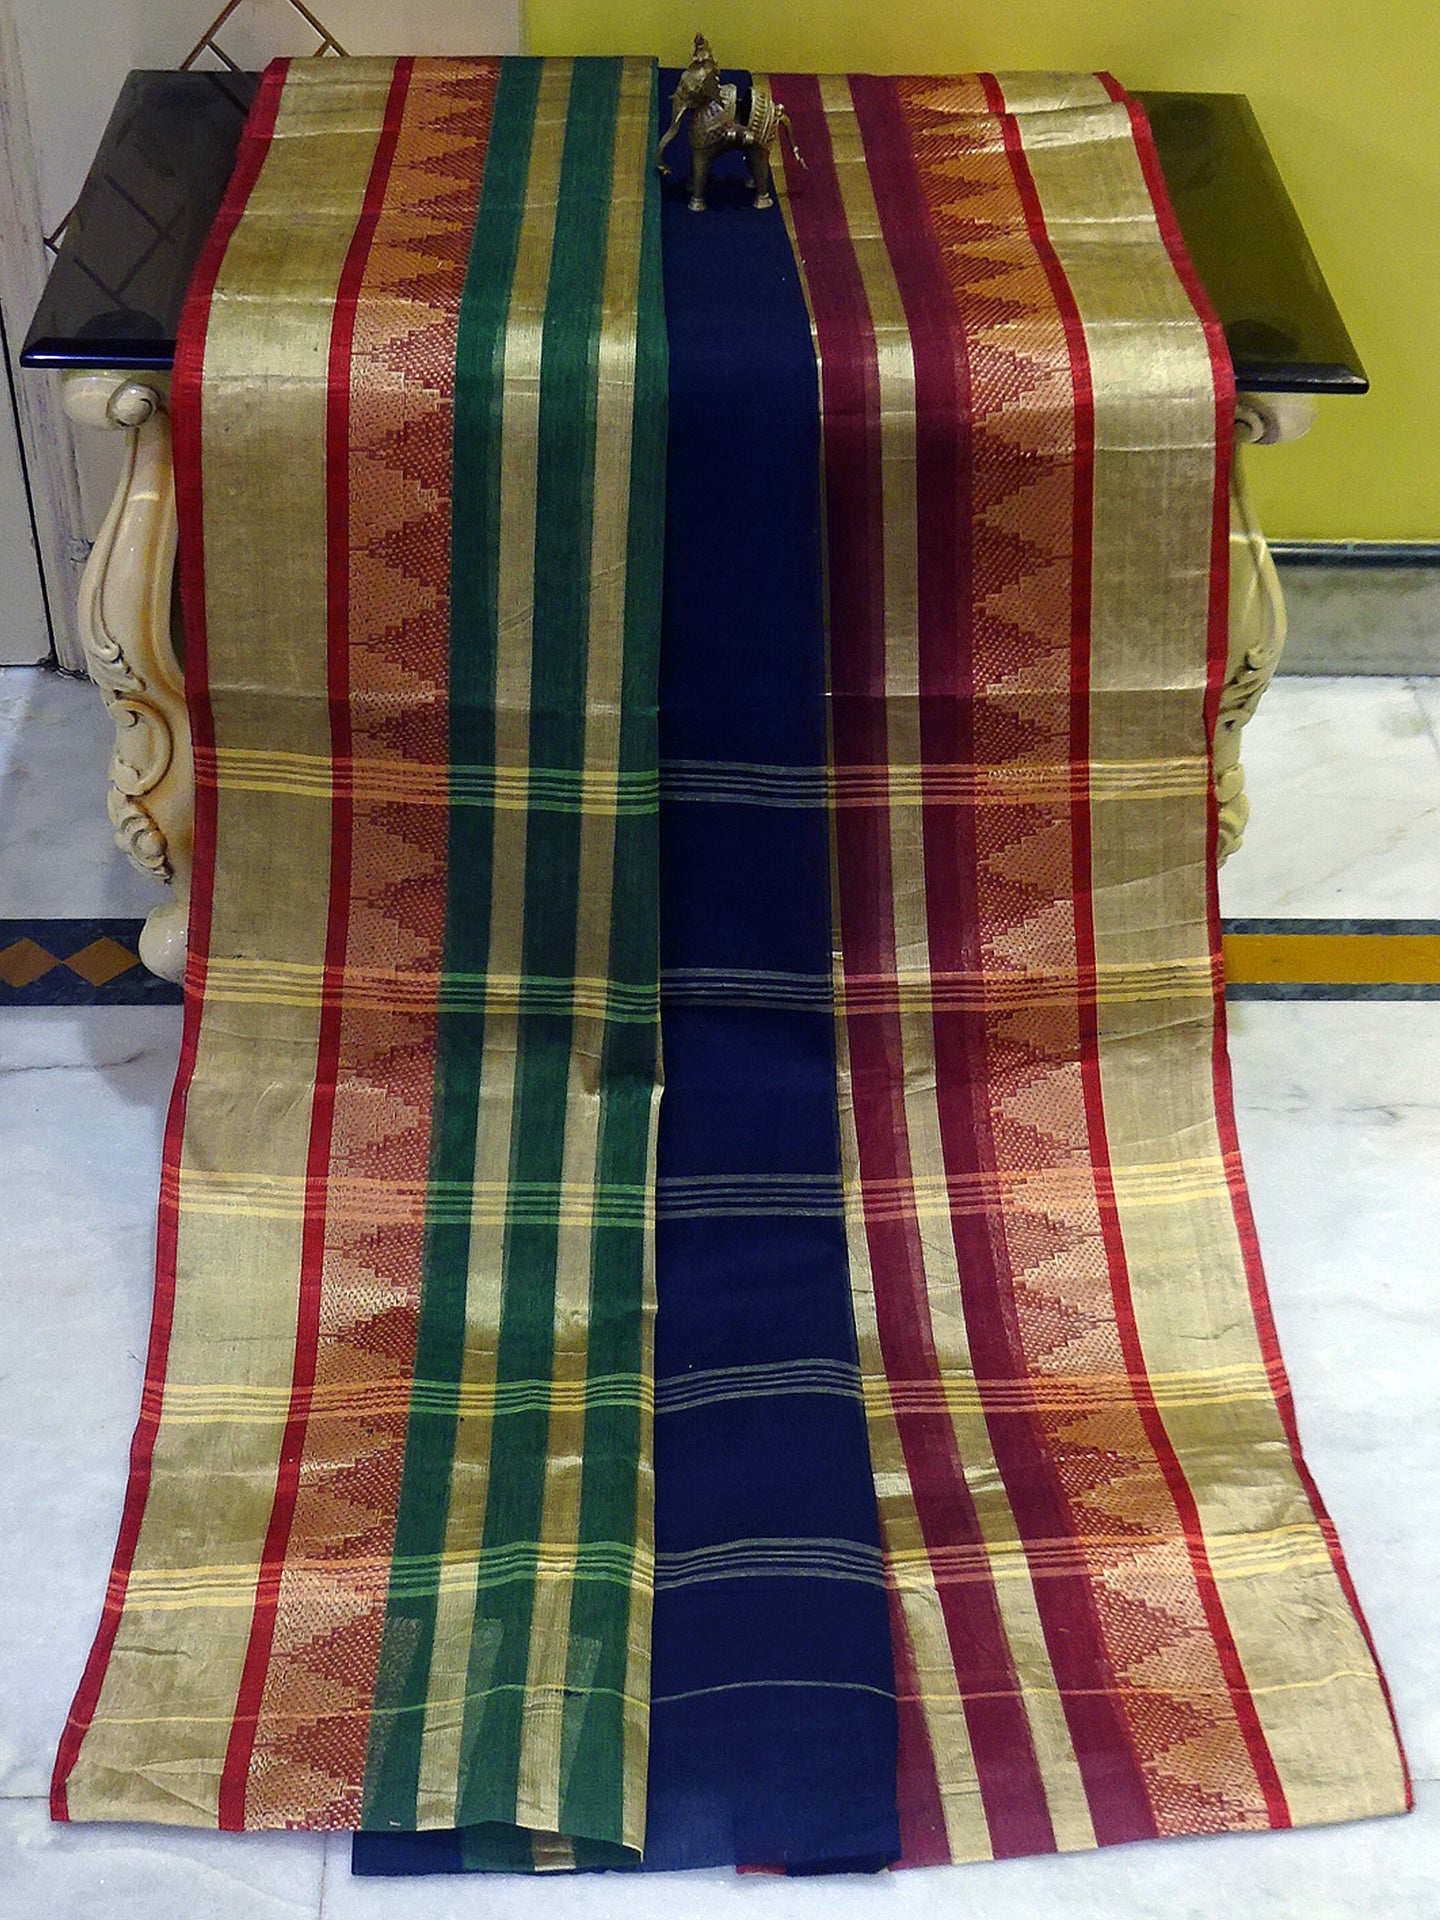 Temple Border Tangail Cotton Saree in Navy Blue, Dark Green and Dark Red with Beige Stripes